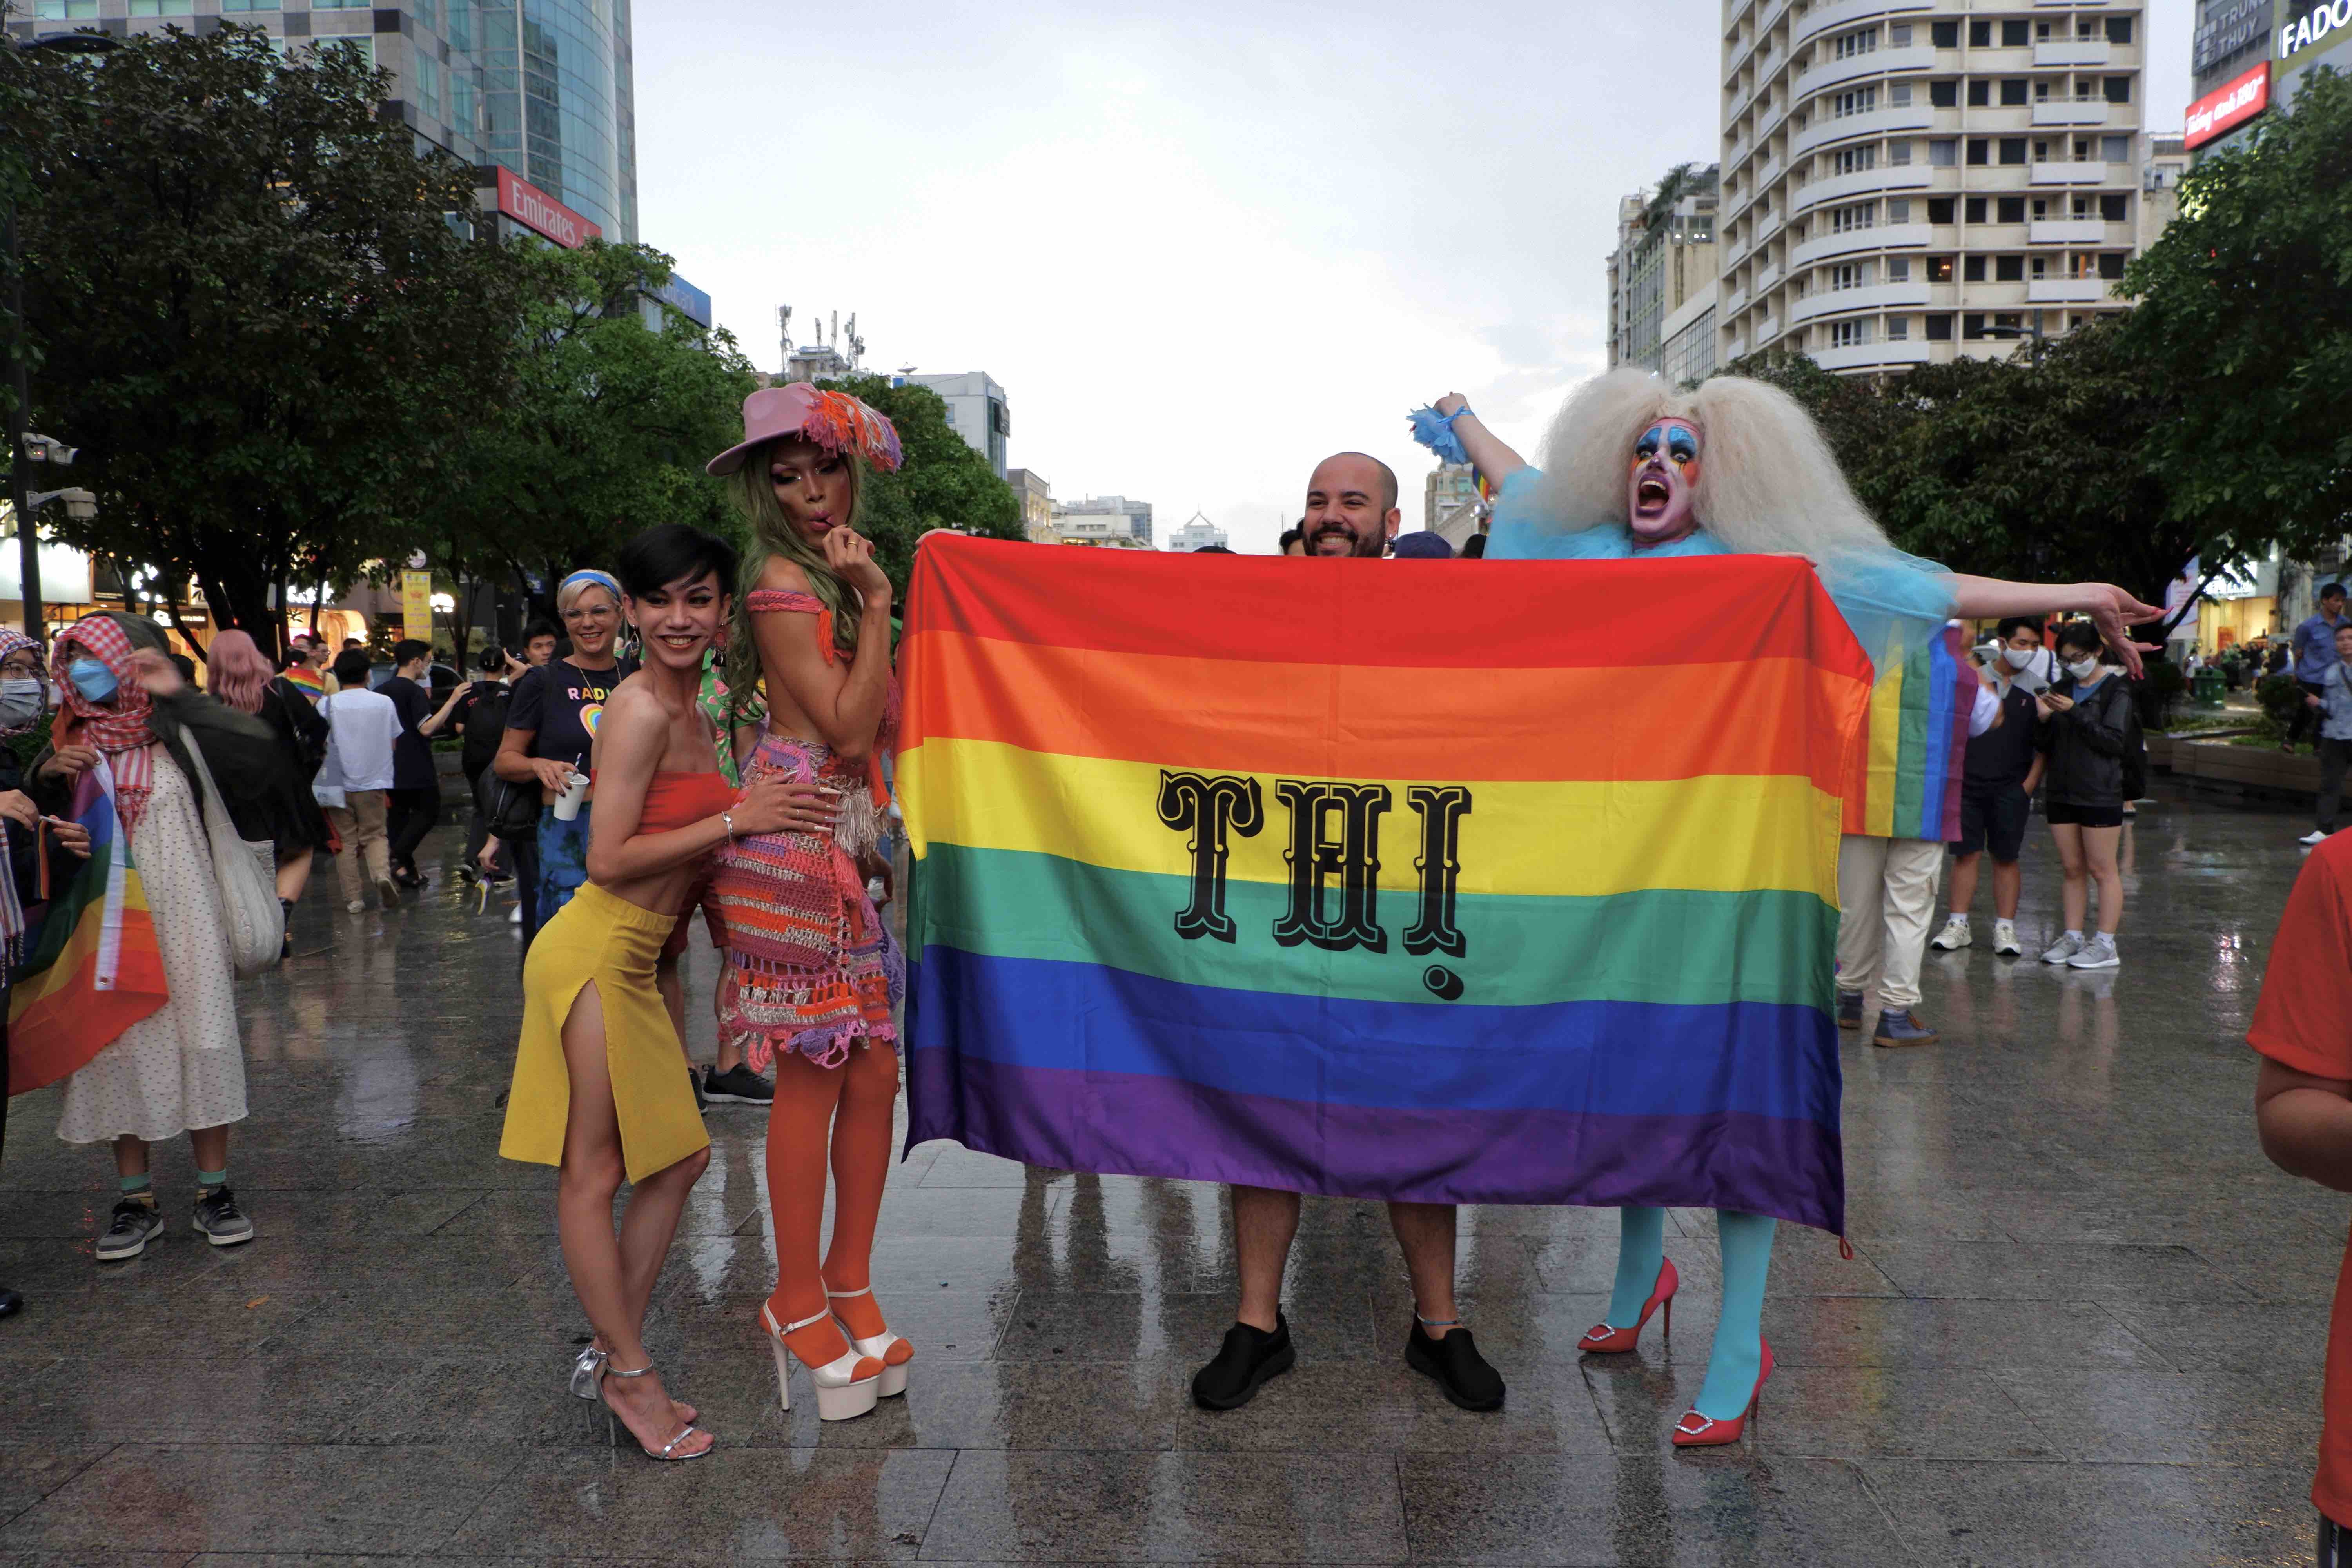 Participants hold a flag to show support for freedom and equality LGBT community during the VietPride parade in Ho Chi Minh City on October 1, 2022. Photo: Linh To / Tuoi Tre News